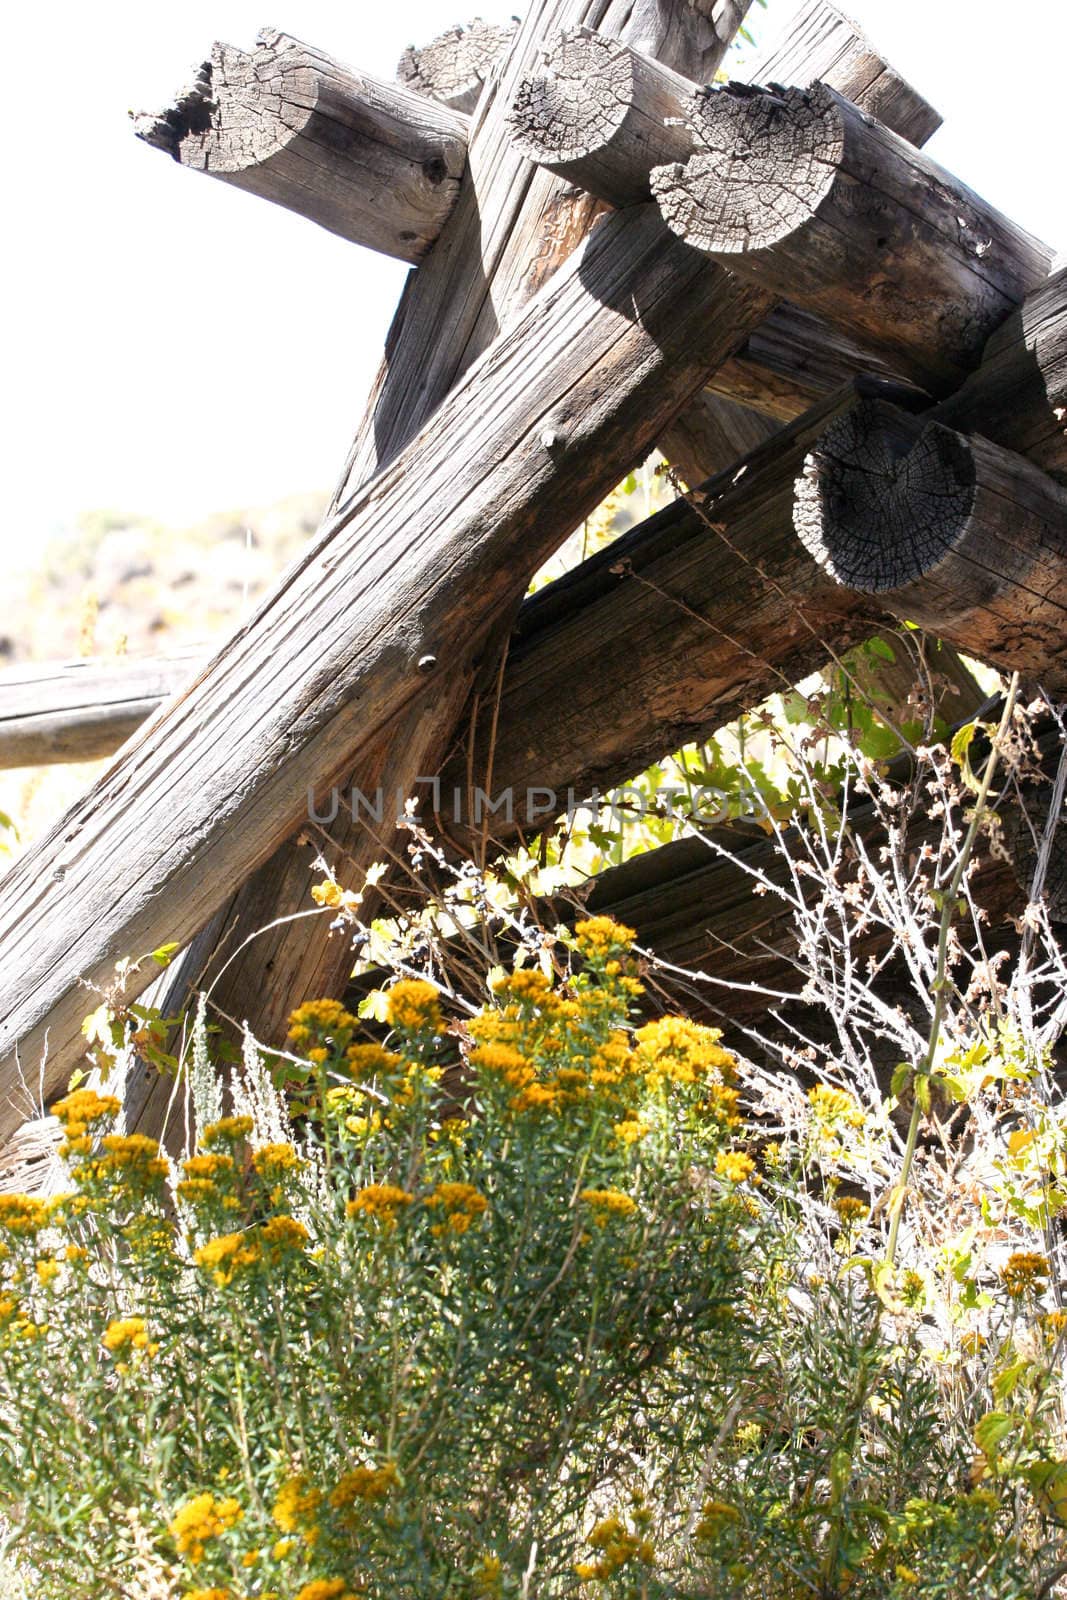 Part of an abandoned cabin with yellow widlflowers and sage brush